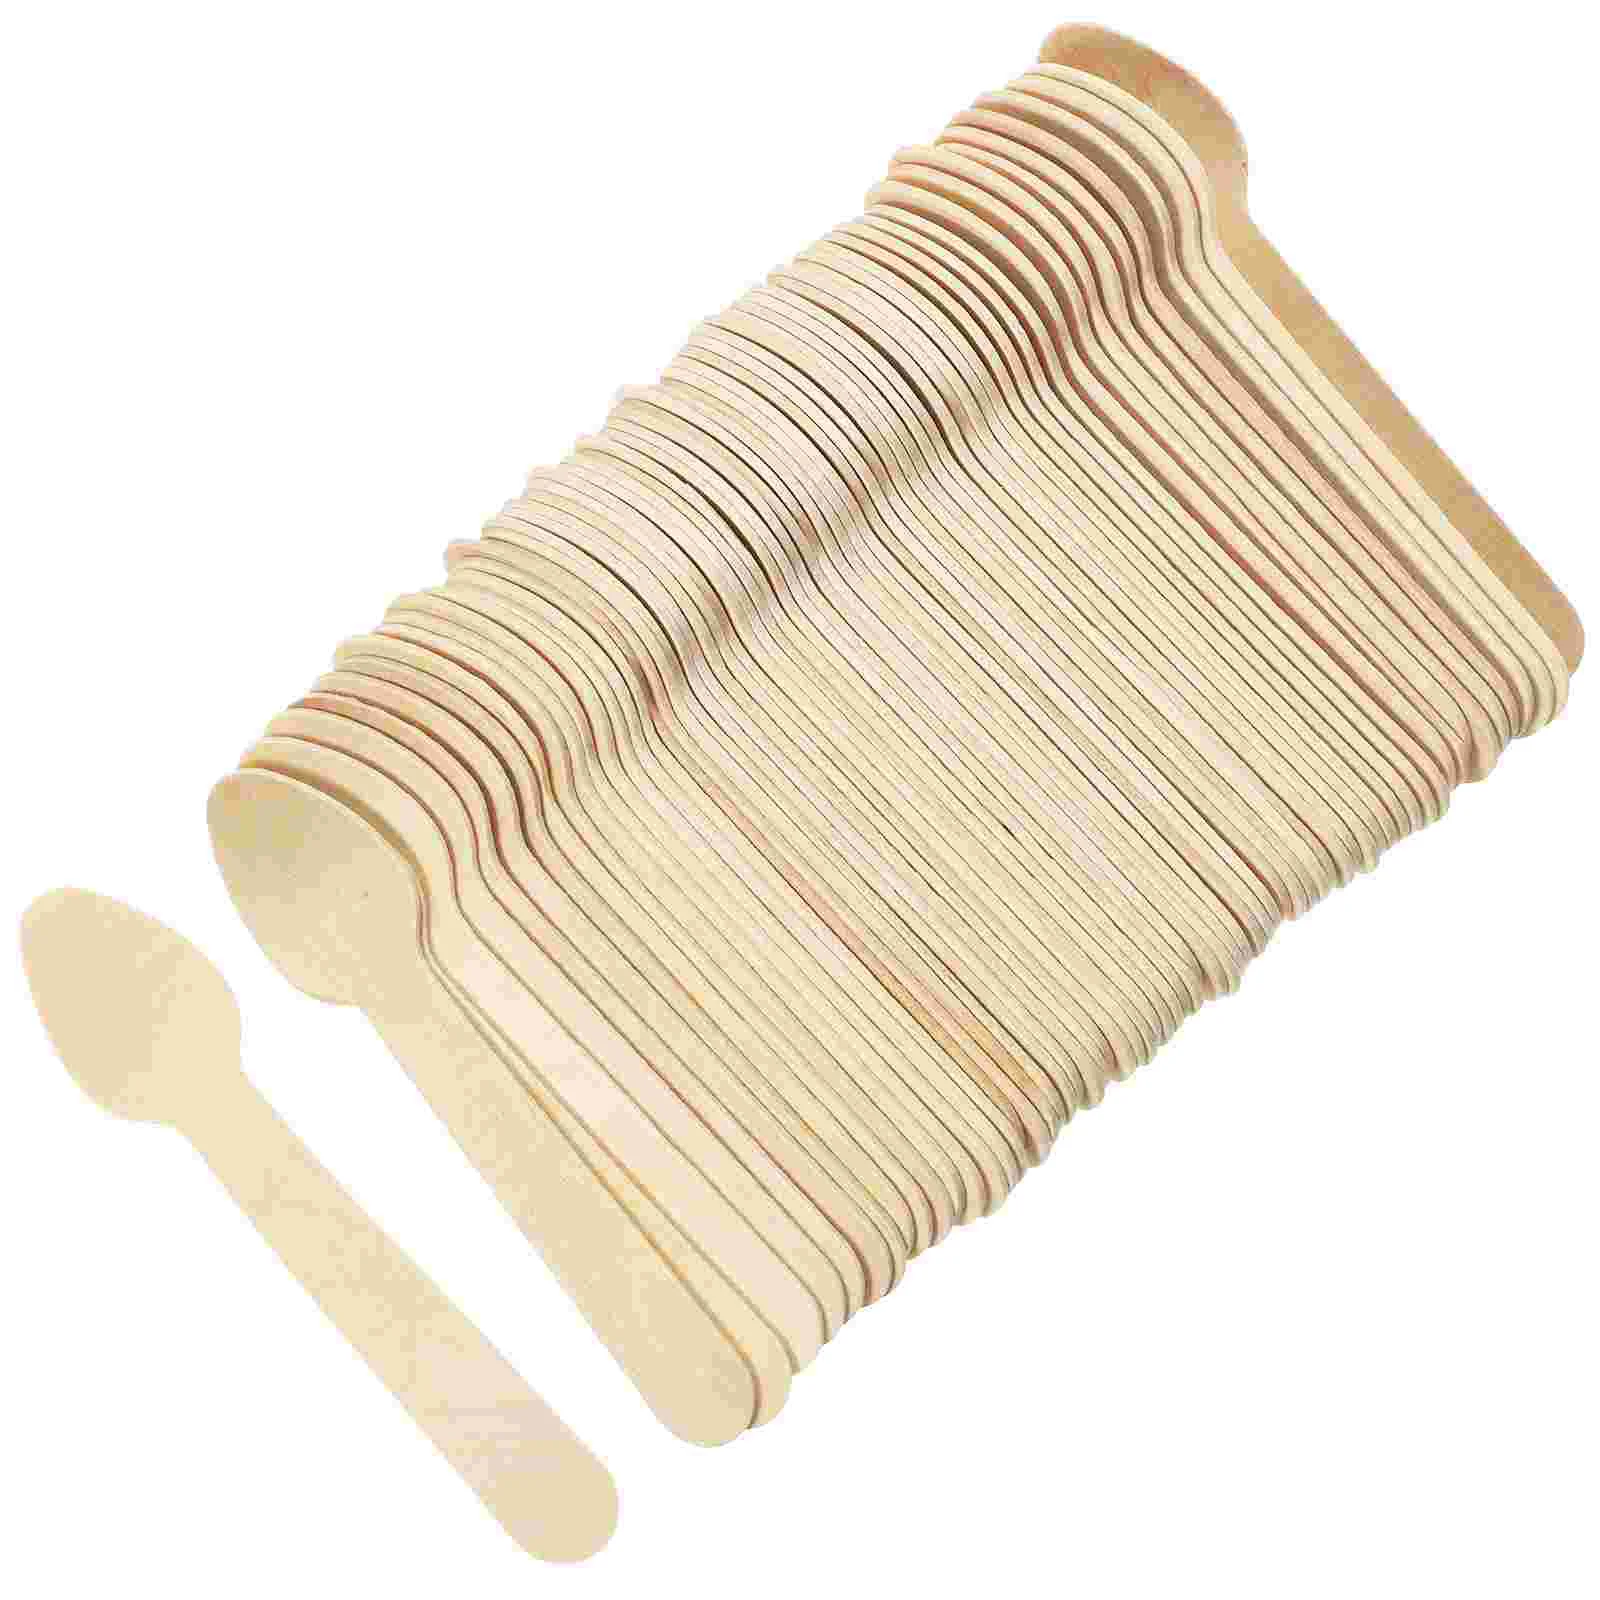 

100pcs Ice Cream Spoons Wooden Spoons Wood Cake Spoons Dessert Serving Scoops